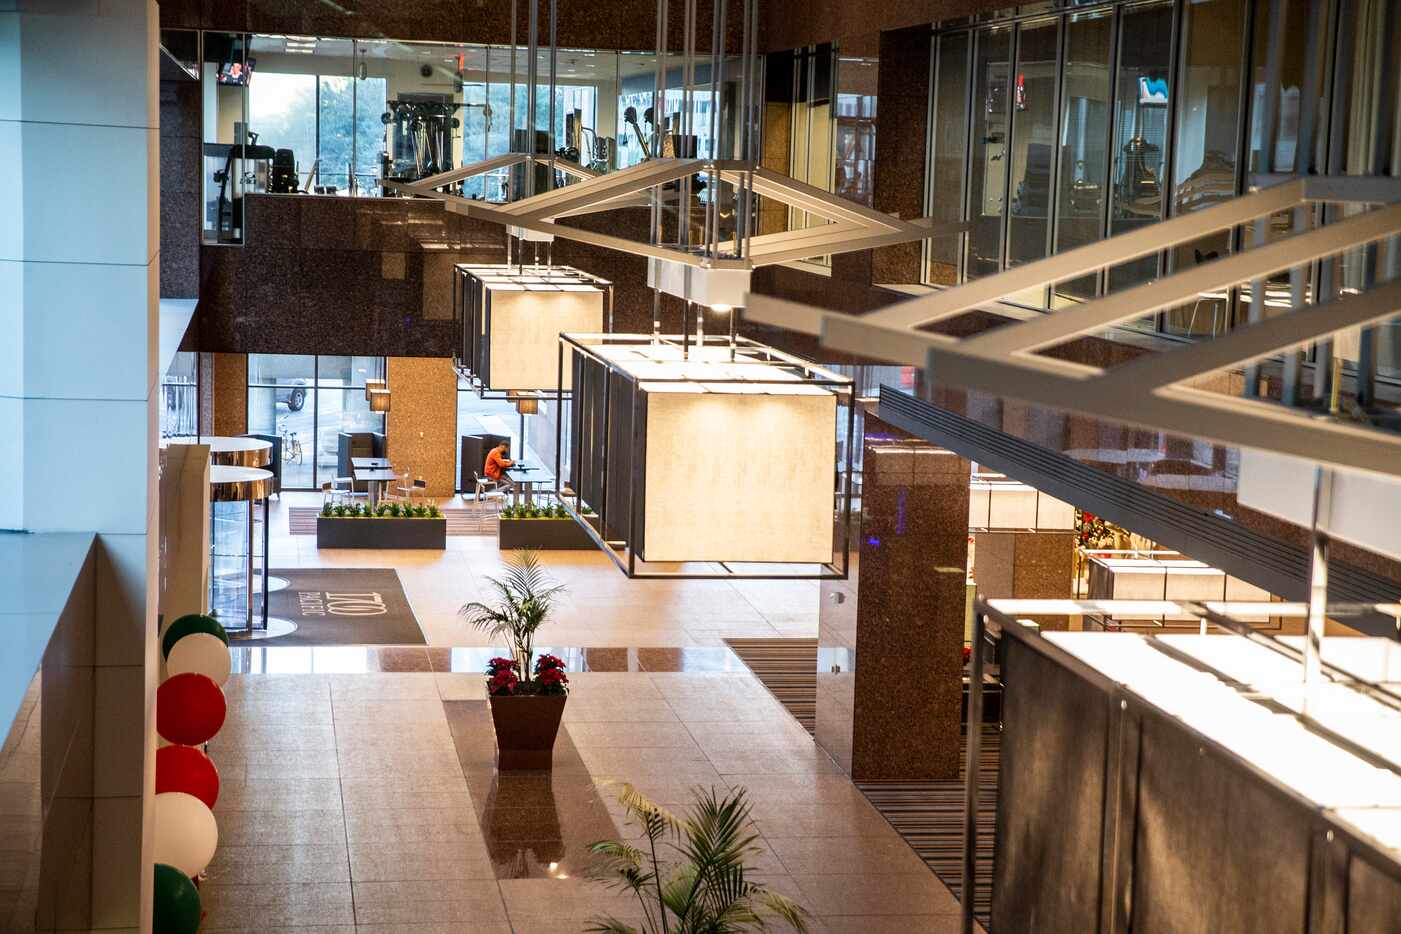 The recently renovated lobby at the 1700 Pacific tower in downtown Dallas.